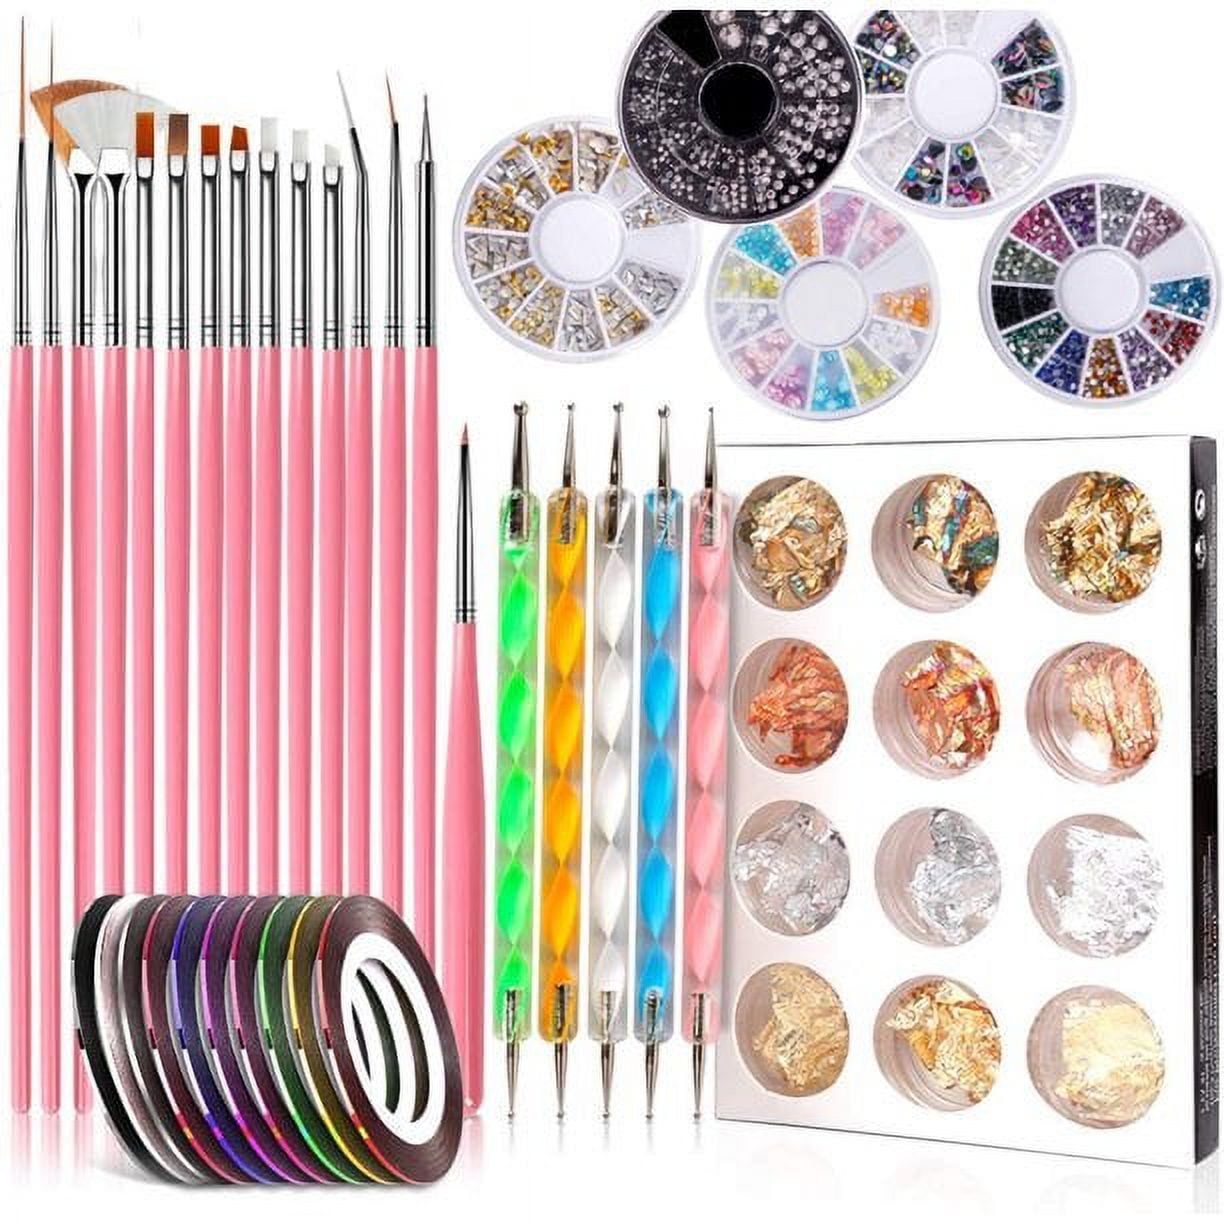 5 pieces Silicone Nail Tools Acrylic Rhinestone Handle Double-ended Nail  Art Pen for Design Nail Foil Carving Drawing